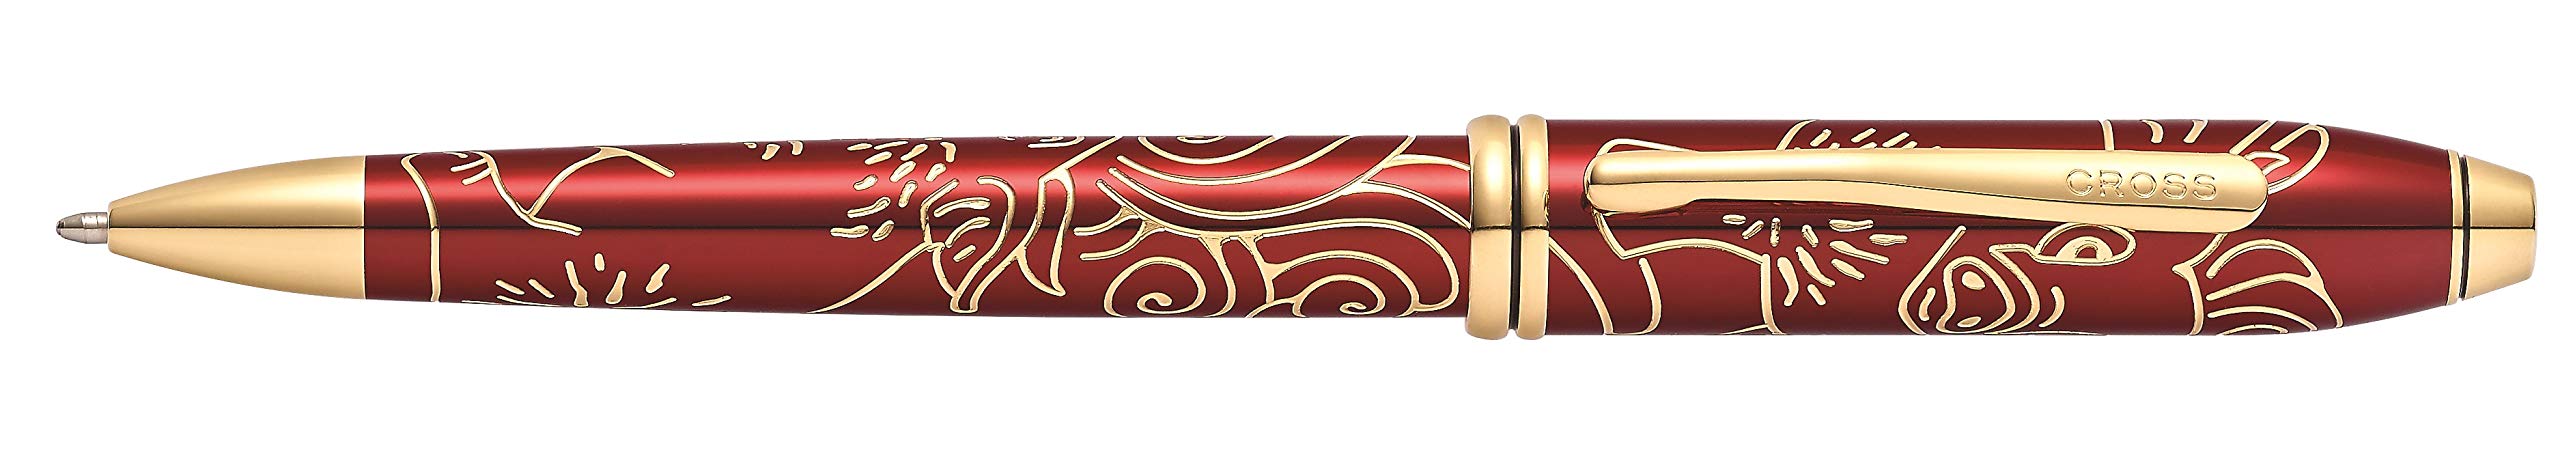 Cross 2019 Cross Townsend Zodiac Year of the Pig Ballpoint Pen with 23KT Gold-Plated Appointments